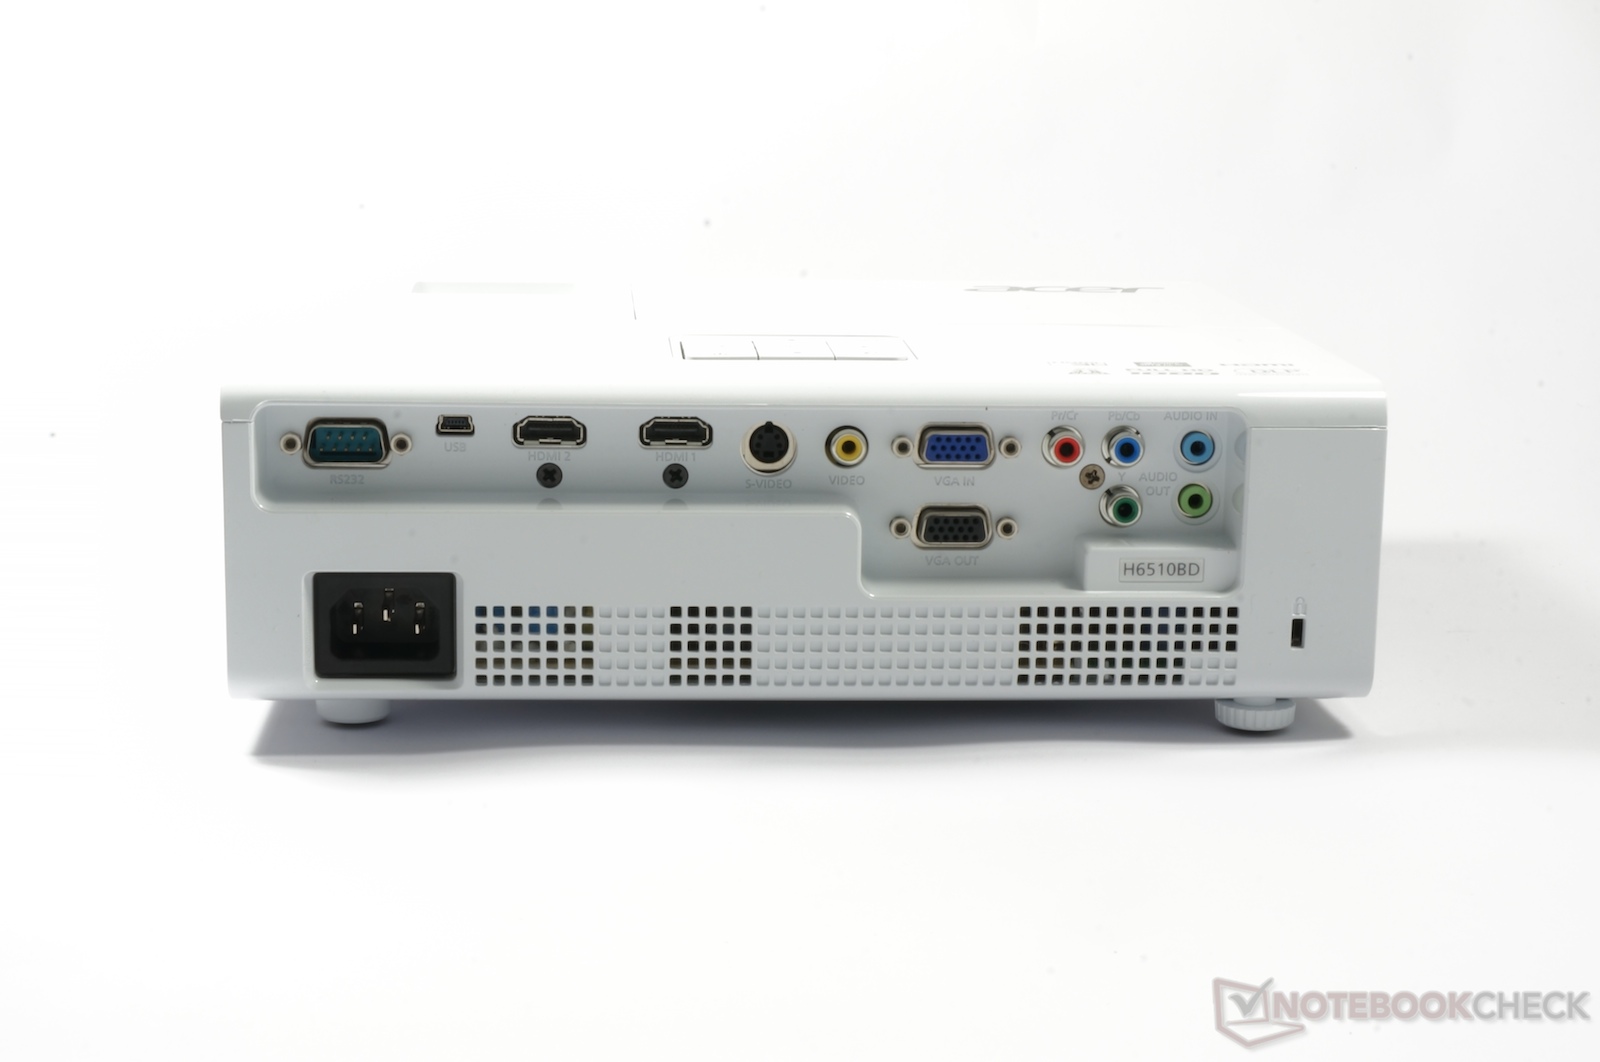 Review Acer H6510BD Full HD Projector - NotebookCheck.net Reviews